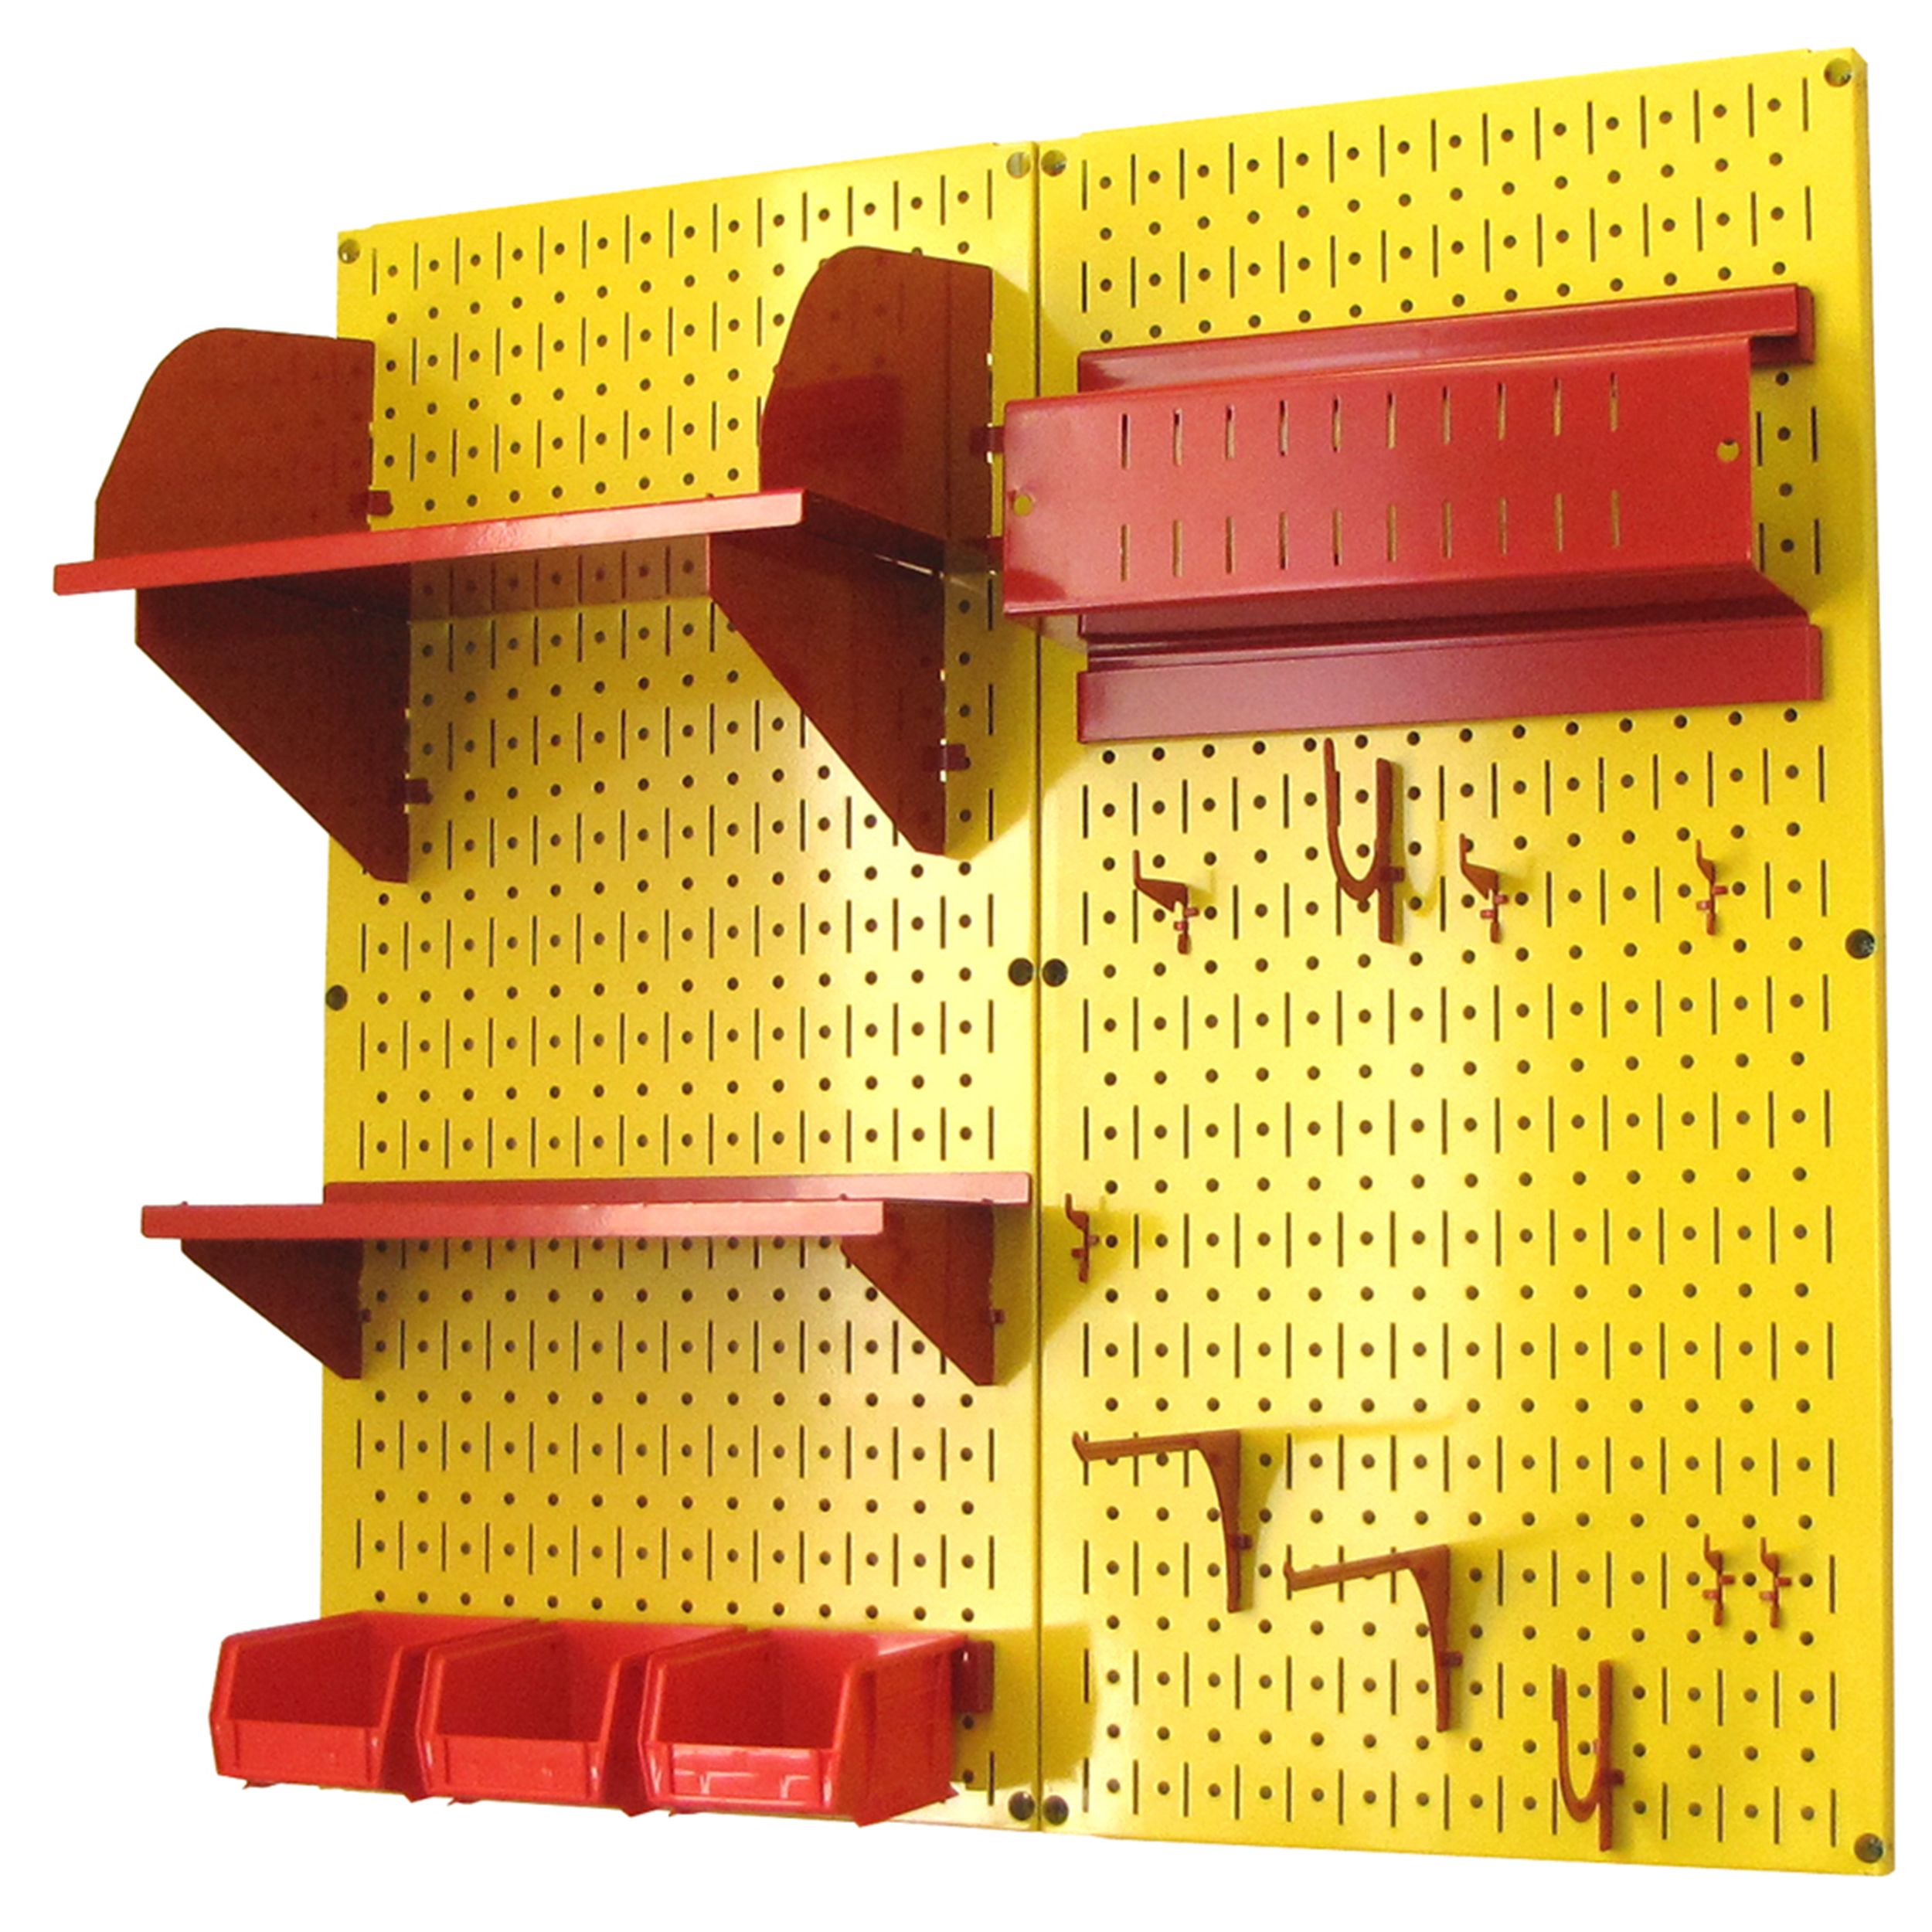 Pegboard Hobby Craft Pegboard Organizer Storage Kit With Yellow Pegboard And Red Accessories